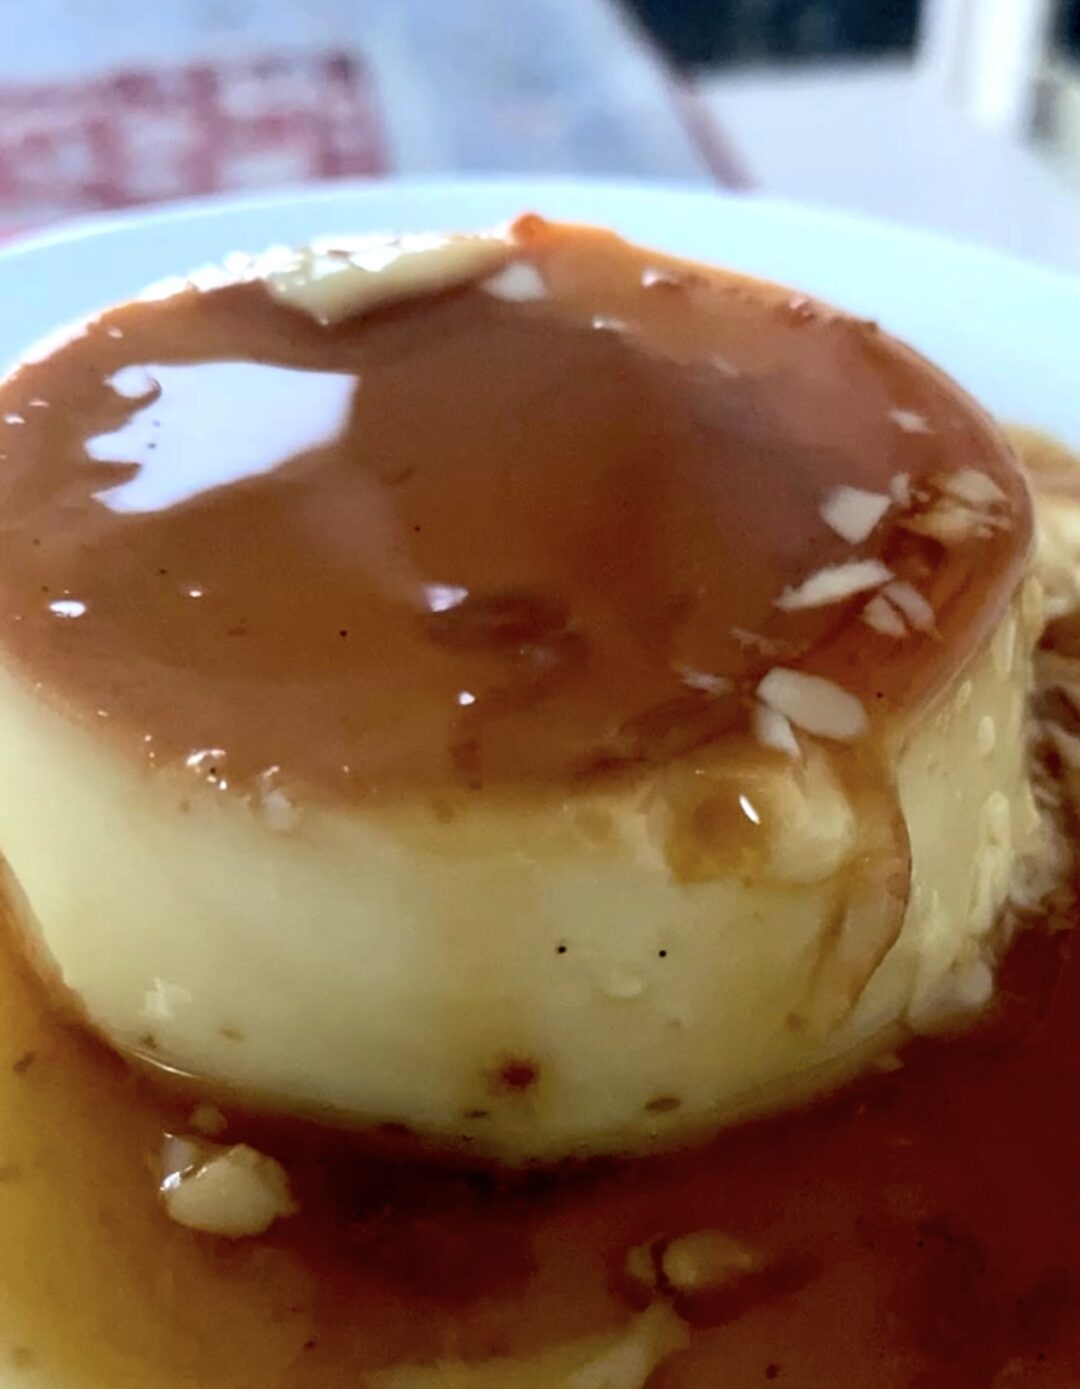 Side view of creme caramel on a plate with caramel sauce